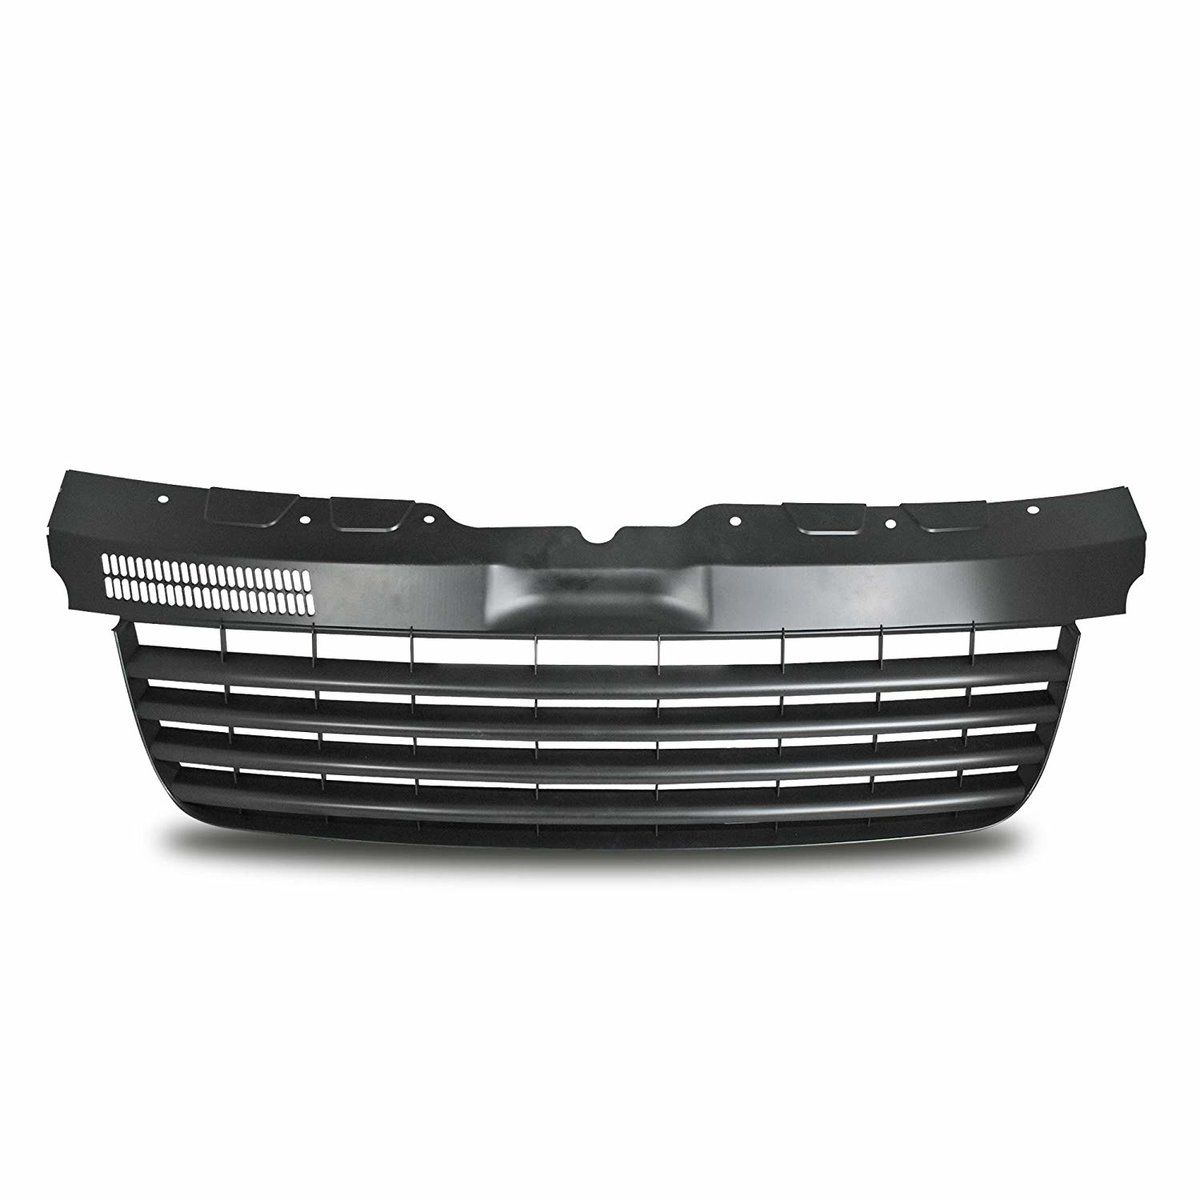 Front Grill Without emblem / badgeless grill for VW T5 Transporter 2003-2009